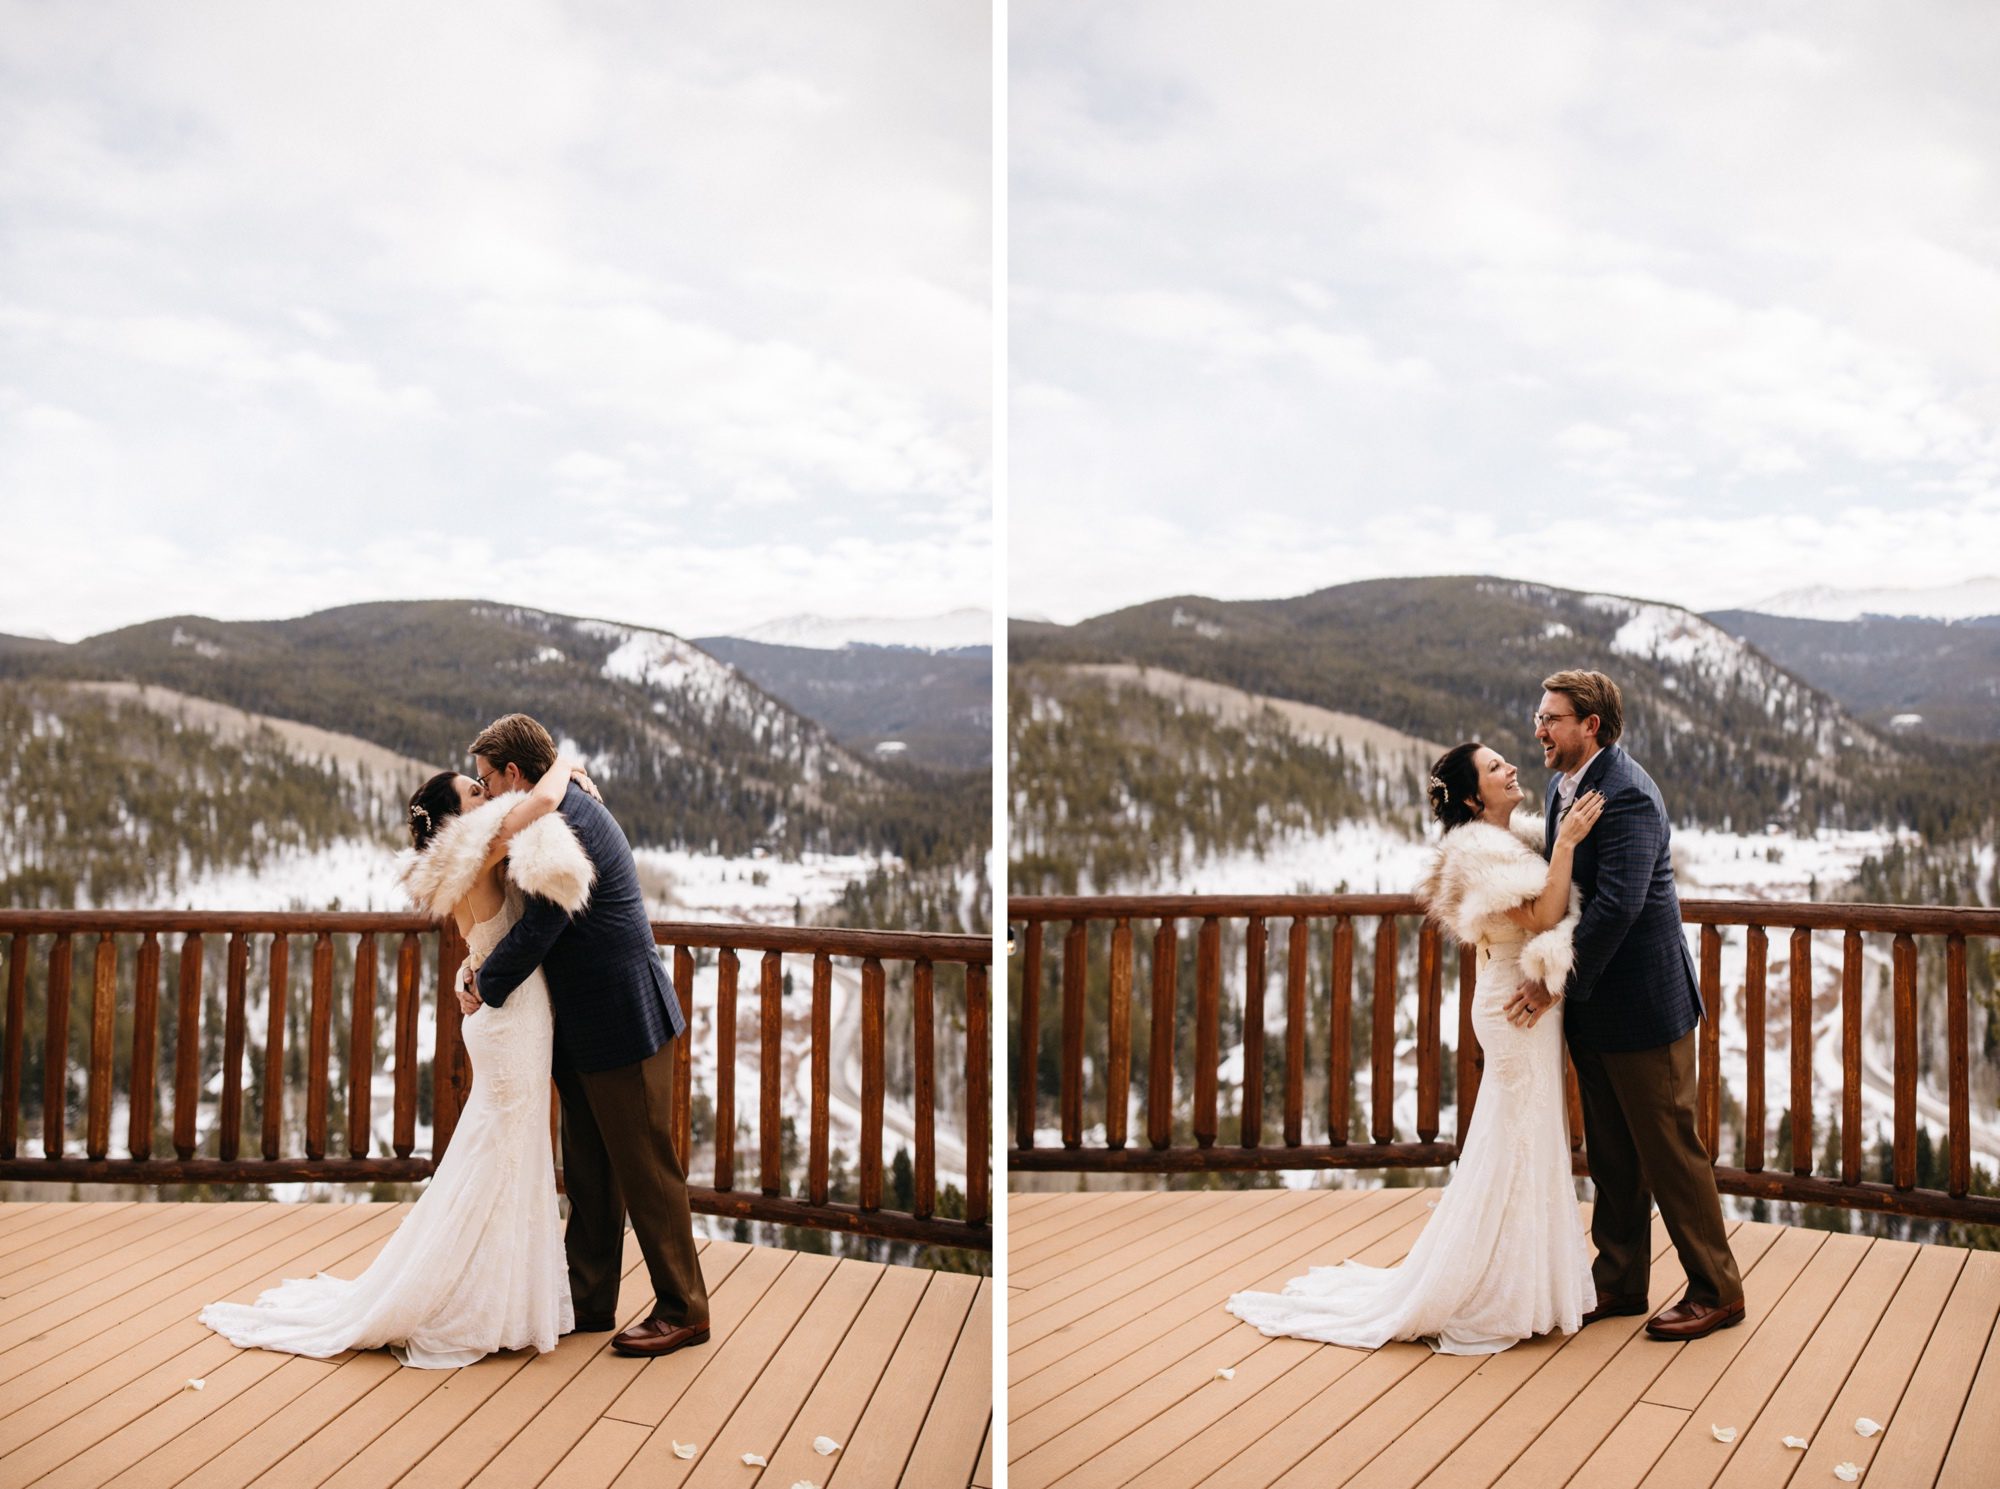 The Lodge at Breckenridge, Breckenridge Colorado Elopement Photographer, Places to Elope in Colorado, Colorado Elopement Locations, Colorado Adventure Elopement, Breckenridge Elopement Photographer, Colorado Mountain Elopement, Colorado Wedding Photographer, Breckenridge Wedding Photographer, Boreas Pass Breckenridge Colorado, Boreas Pass Colorado Elopement, Adventure Elopement, Adventure Wedding, Intimate Wedding, Places to Elope, Winter Wedding, Winter Elopement, Winter wedding ceremony